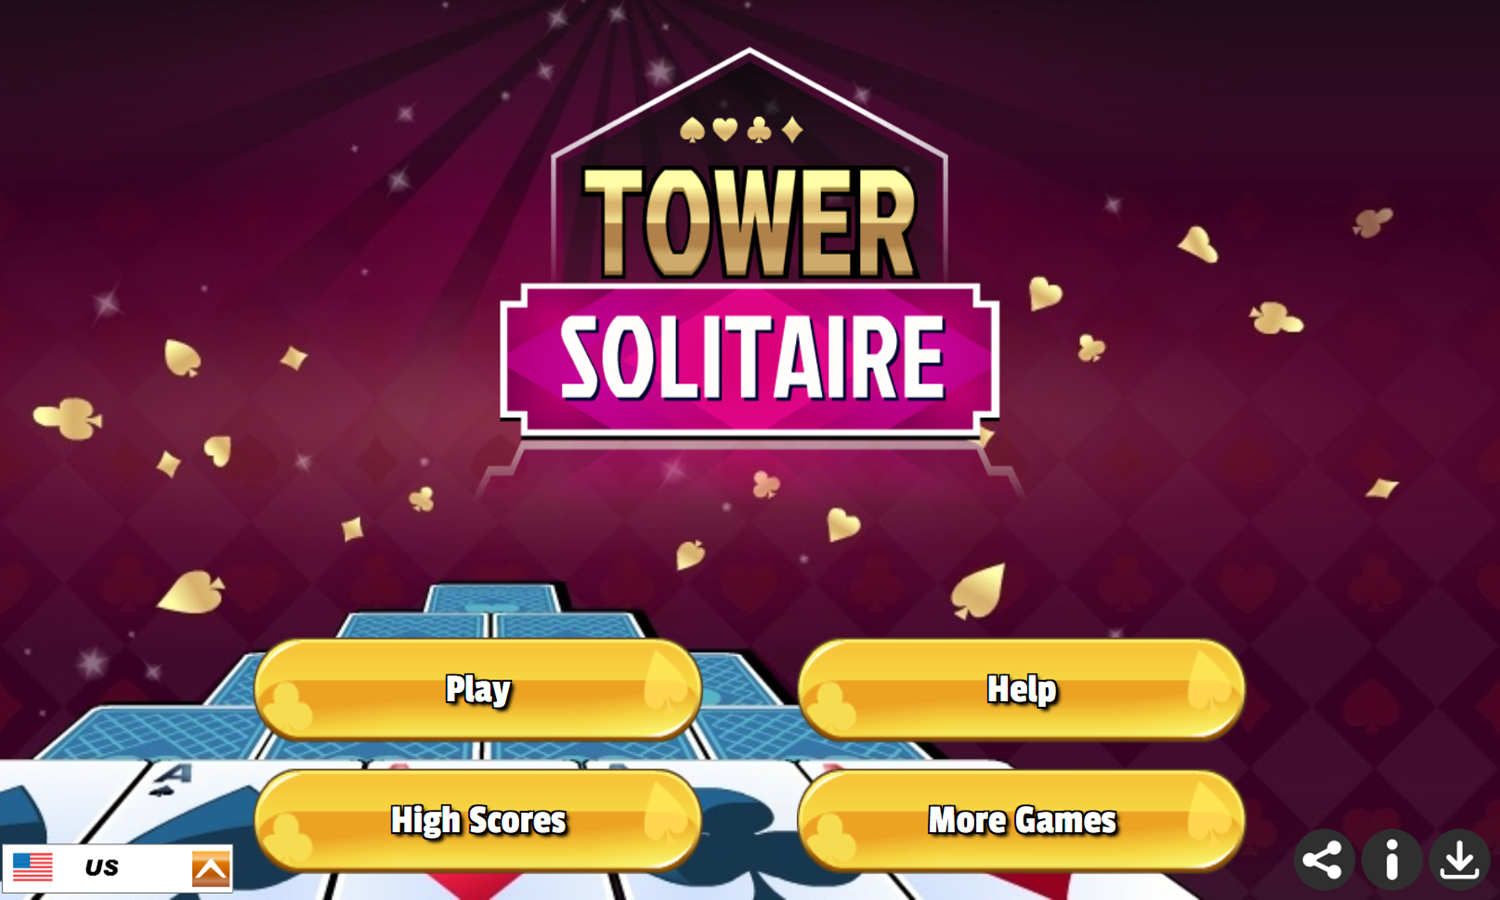 Tower Solitaire Game Welcome Screen Screenshot.